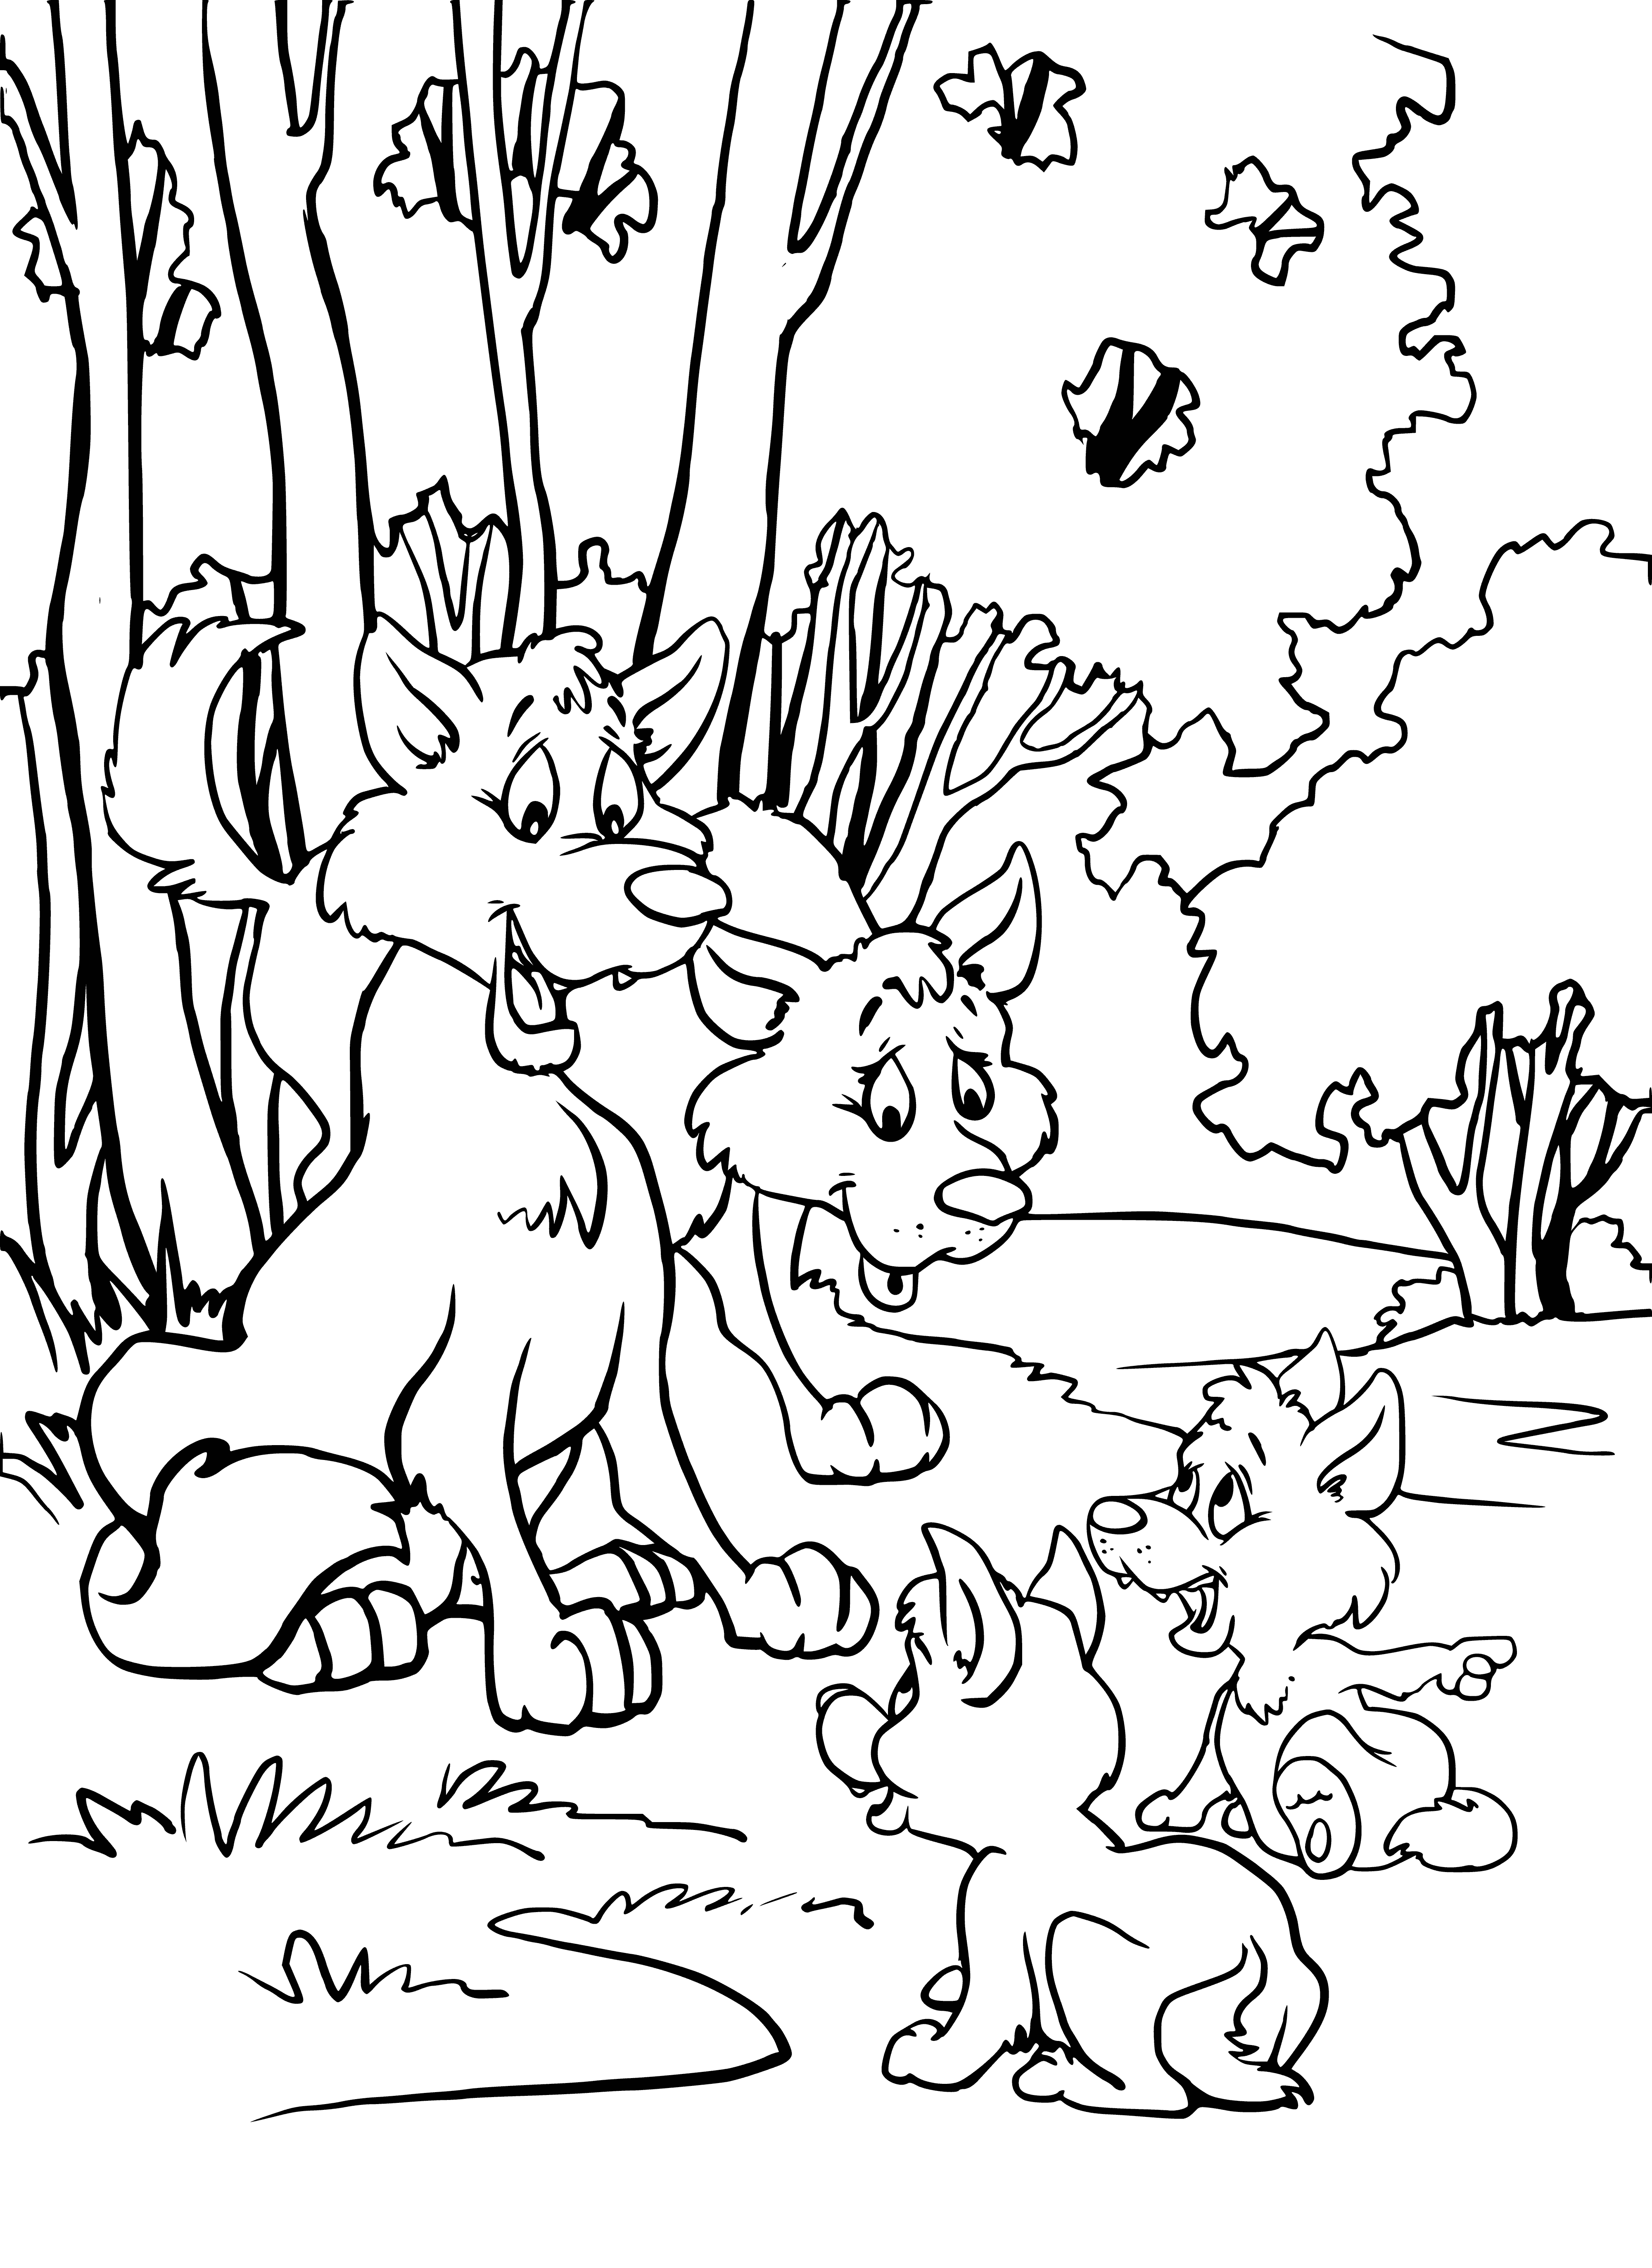 coloring page: Oreshenka and 3 wolves stand in forest, looking at viewer. Wolves of different sizes, led by largest. All show happy faces w/ tongues out.